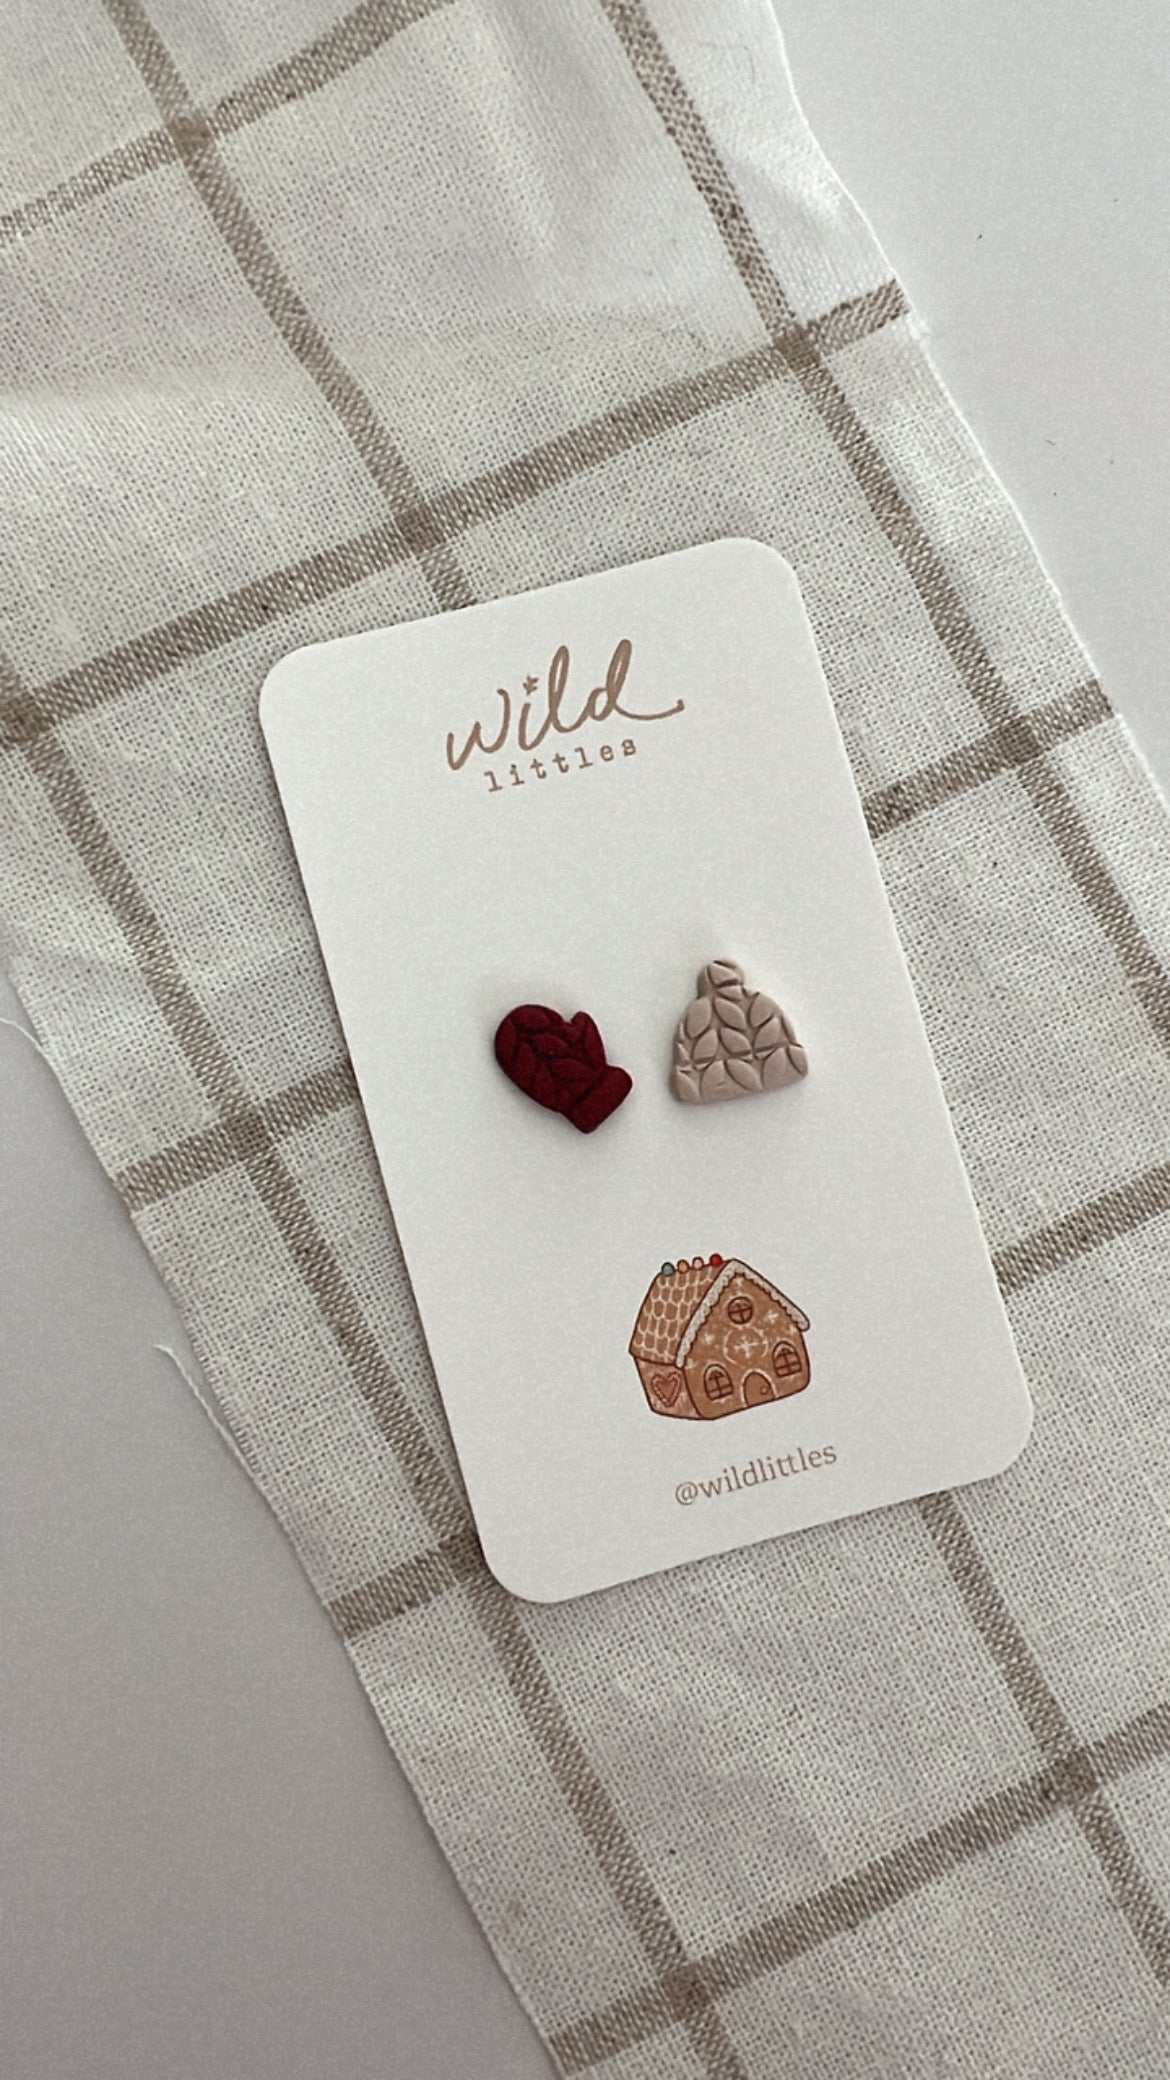 holiday earrings - hat + mittens cranberry + creme | Wild Littles